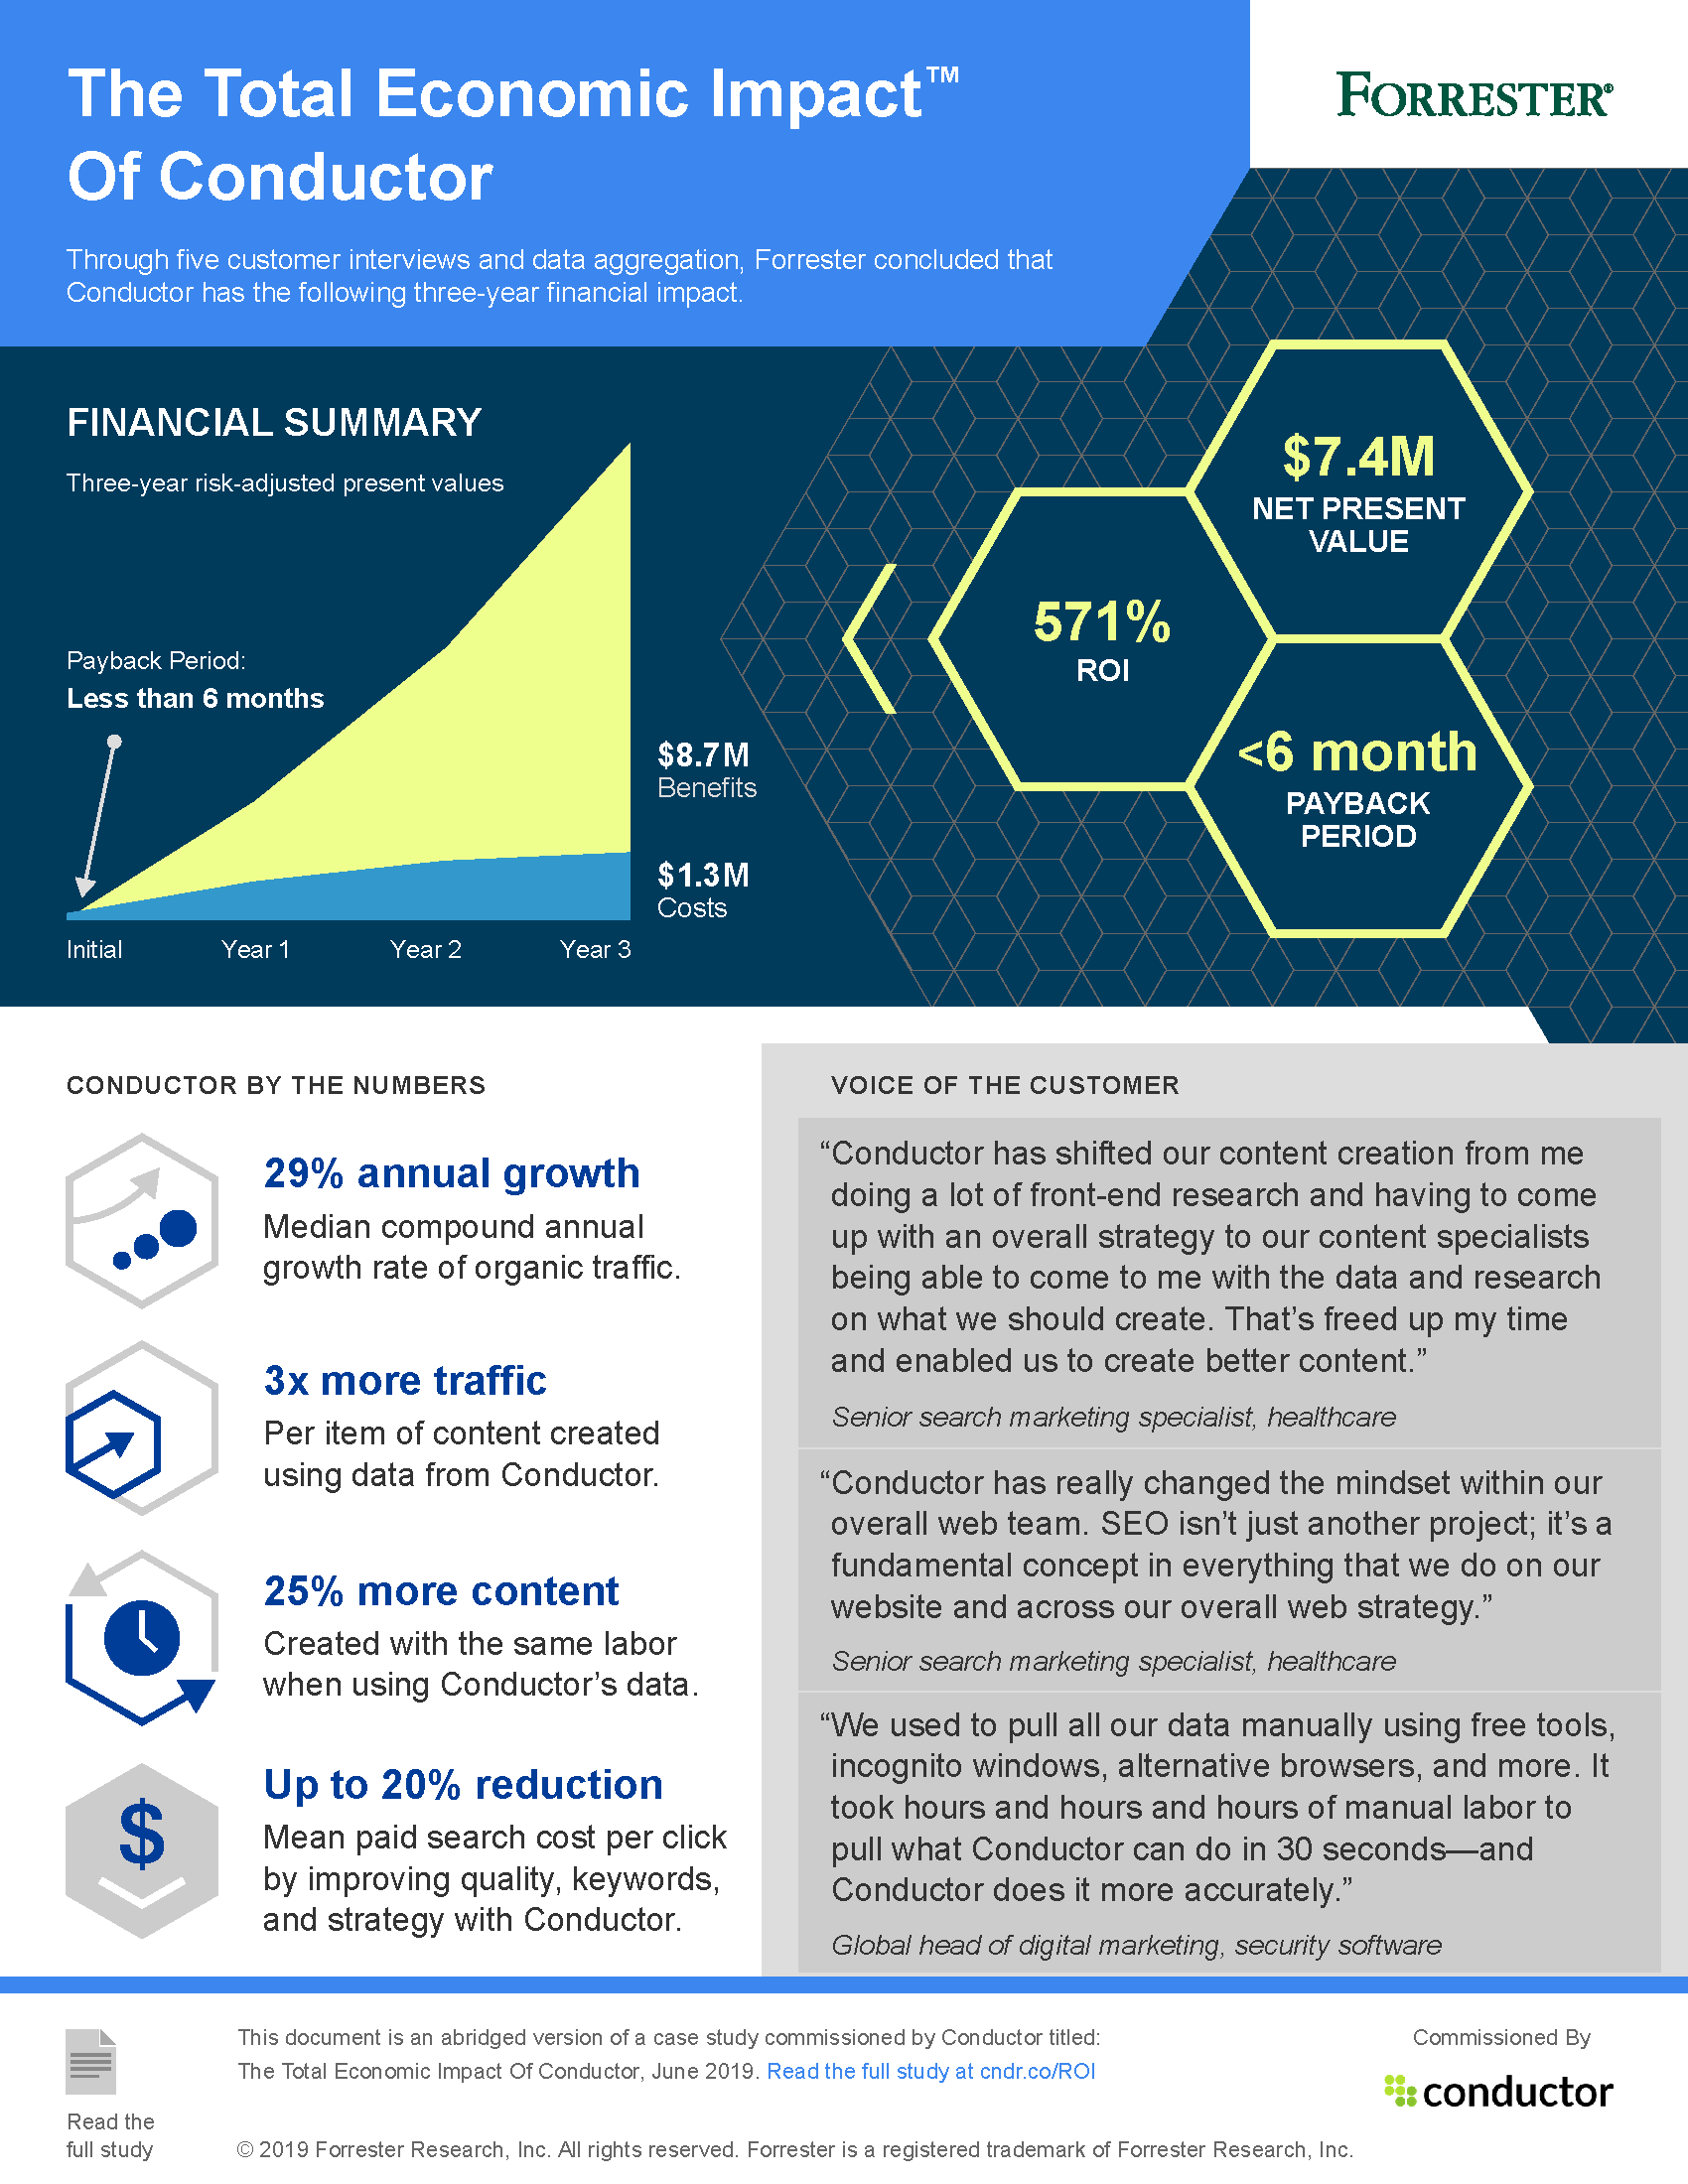 Forrester Tei Of Conductor June 2019 Infographic Final